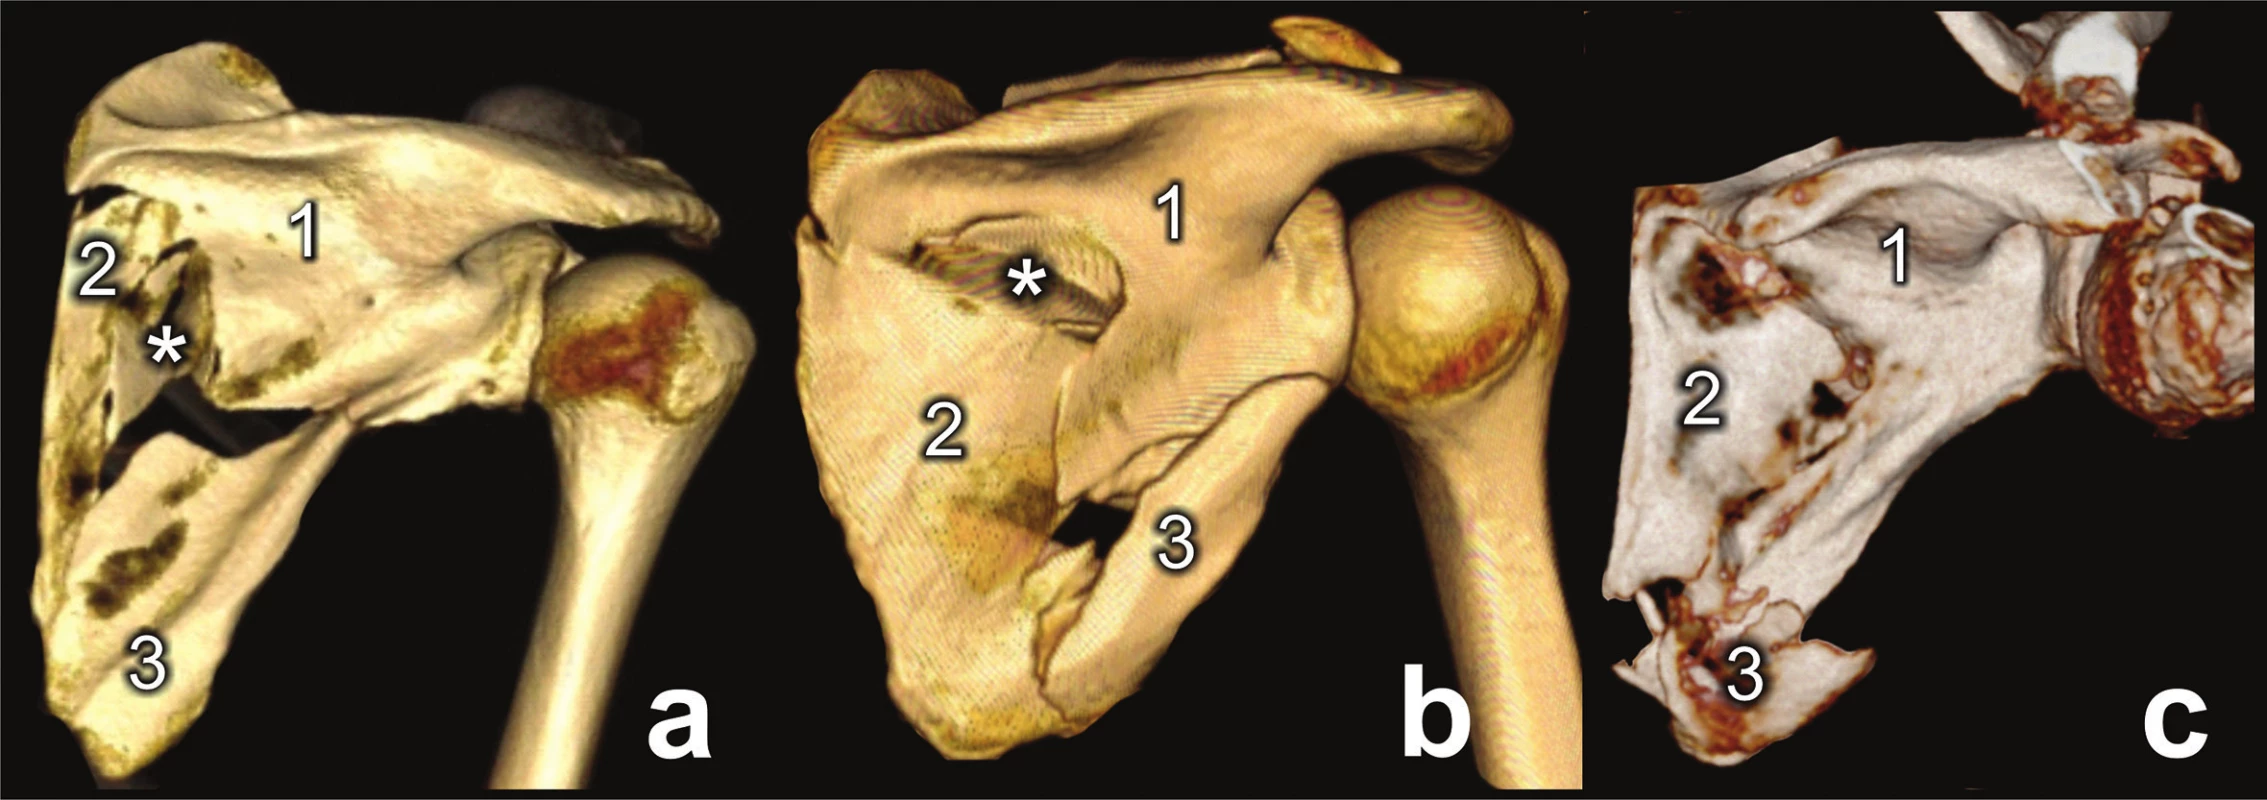 Types of three-part fracture of lateral pillar
a – large inferior angle fragment, 1− glenoid fragment, 2 – inferior angle fragment, 3 – medial border fragment; b – large inferomedial fragment, 1 – glenoid fragment, 2 – lateral border fragment, 3 – large inferomedial fragment; c – large glenoid fragment, 1 – glenoid fragment, 2 – inferior angle fragment, 3 – medial border fragment,* - intercalary fragment.